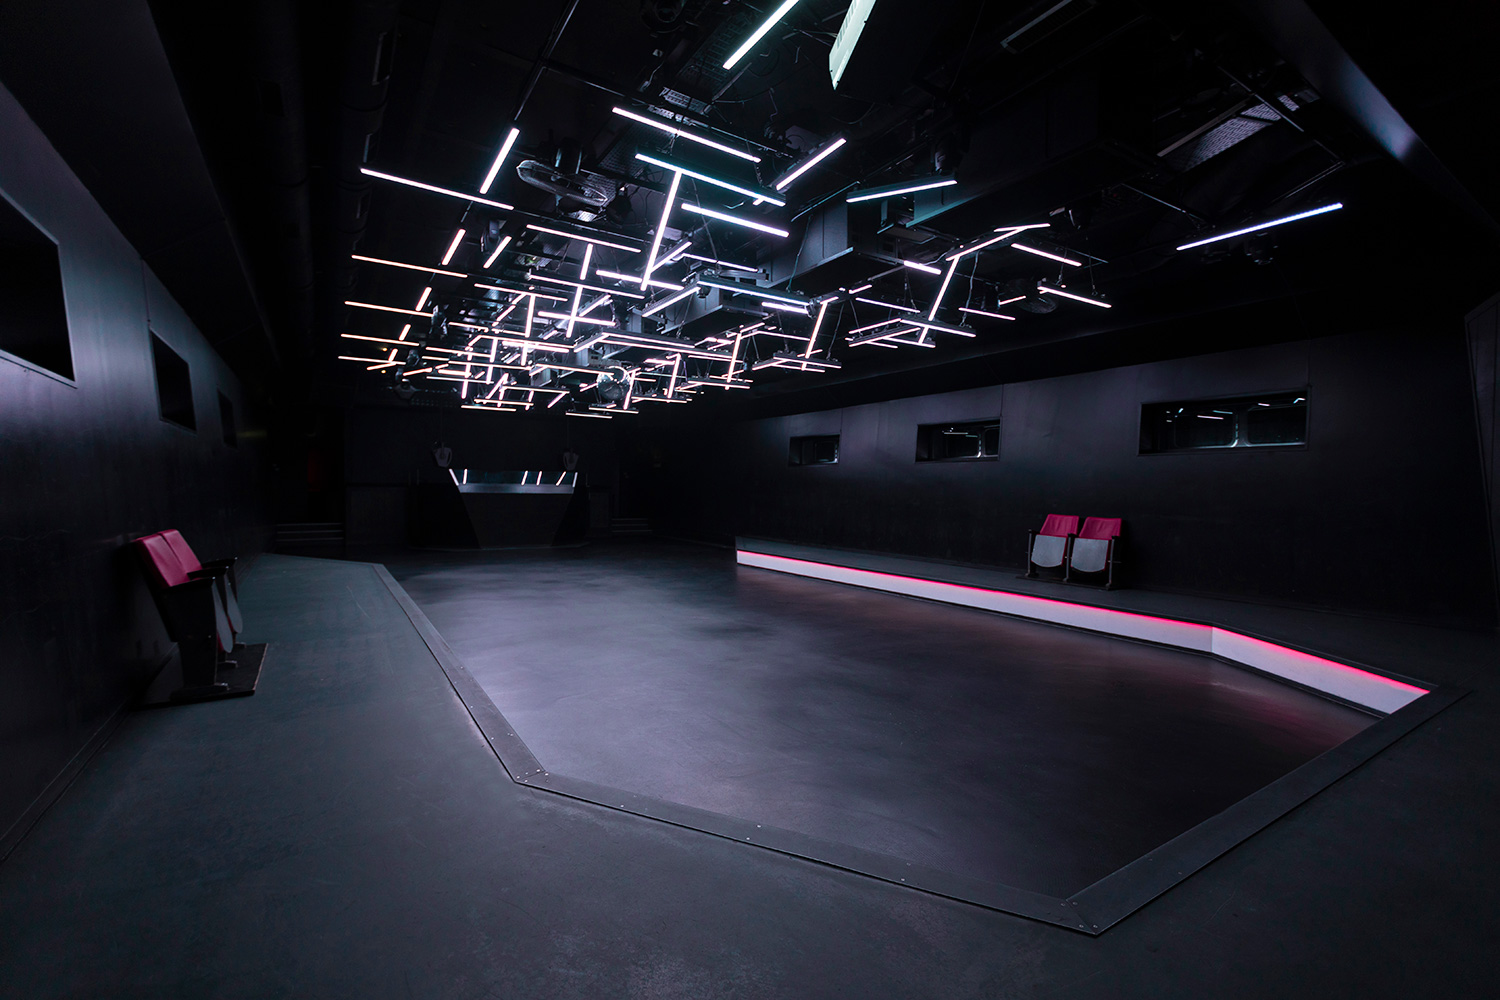 WSDG was in charge of the famous EDM nightclub Nordstern in Basel, Switzerland sound isolation, acoustics, and audio design inside the nightclub. Nightclub View.